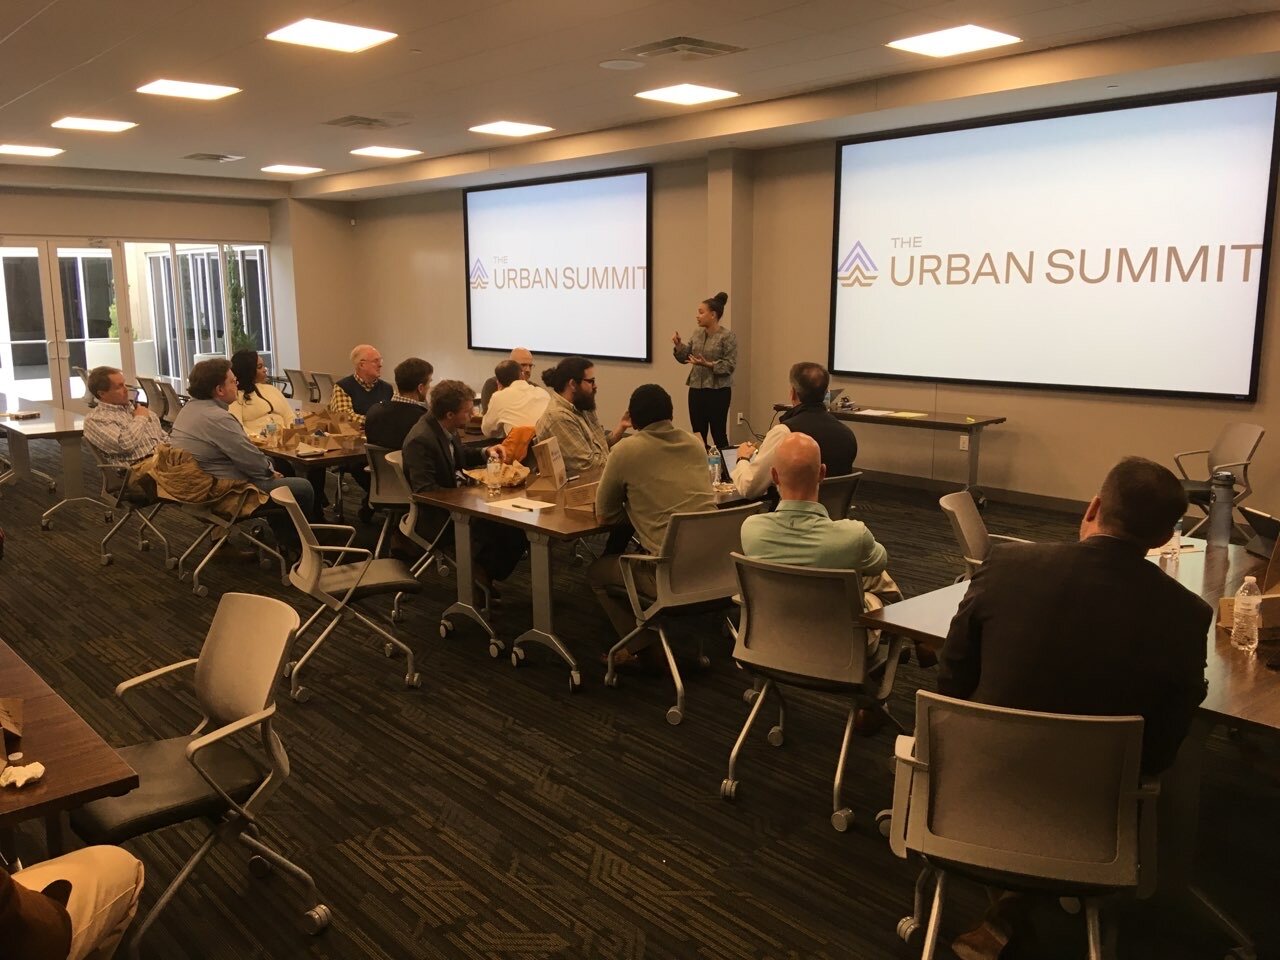 Urban Summit hosted a luncheon for business owners and influencers to discuss about how businesses can work together to create thrives workplaces for all. (Urban Summit)